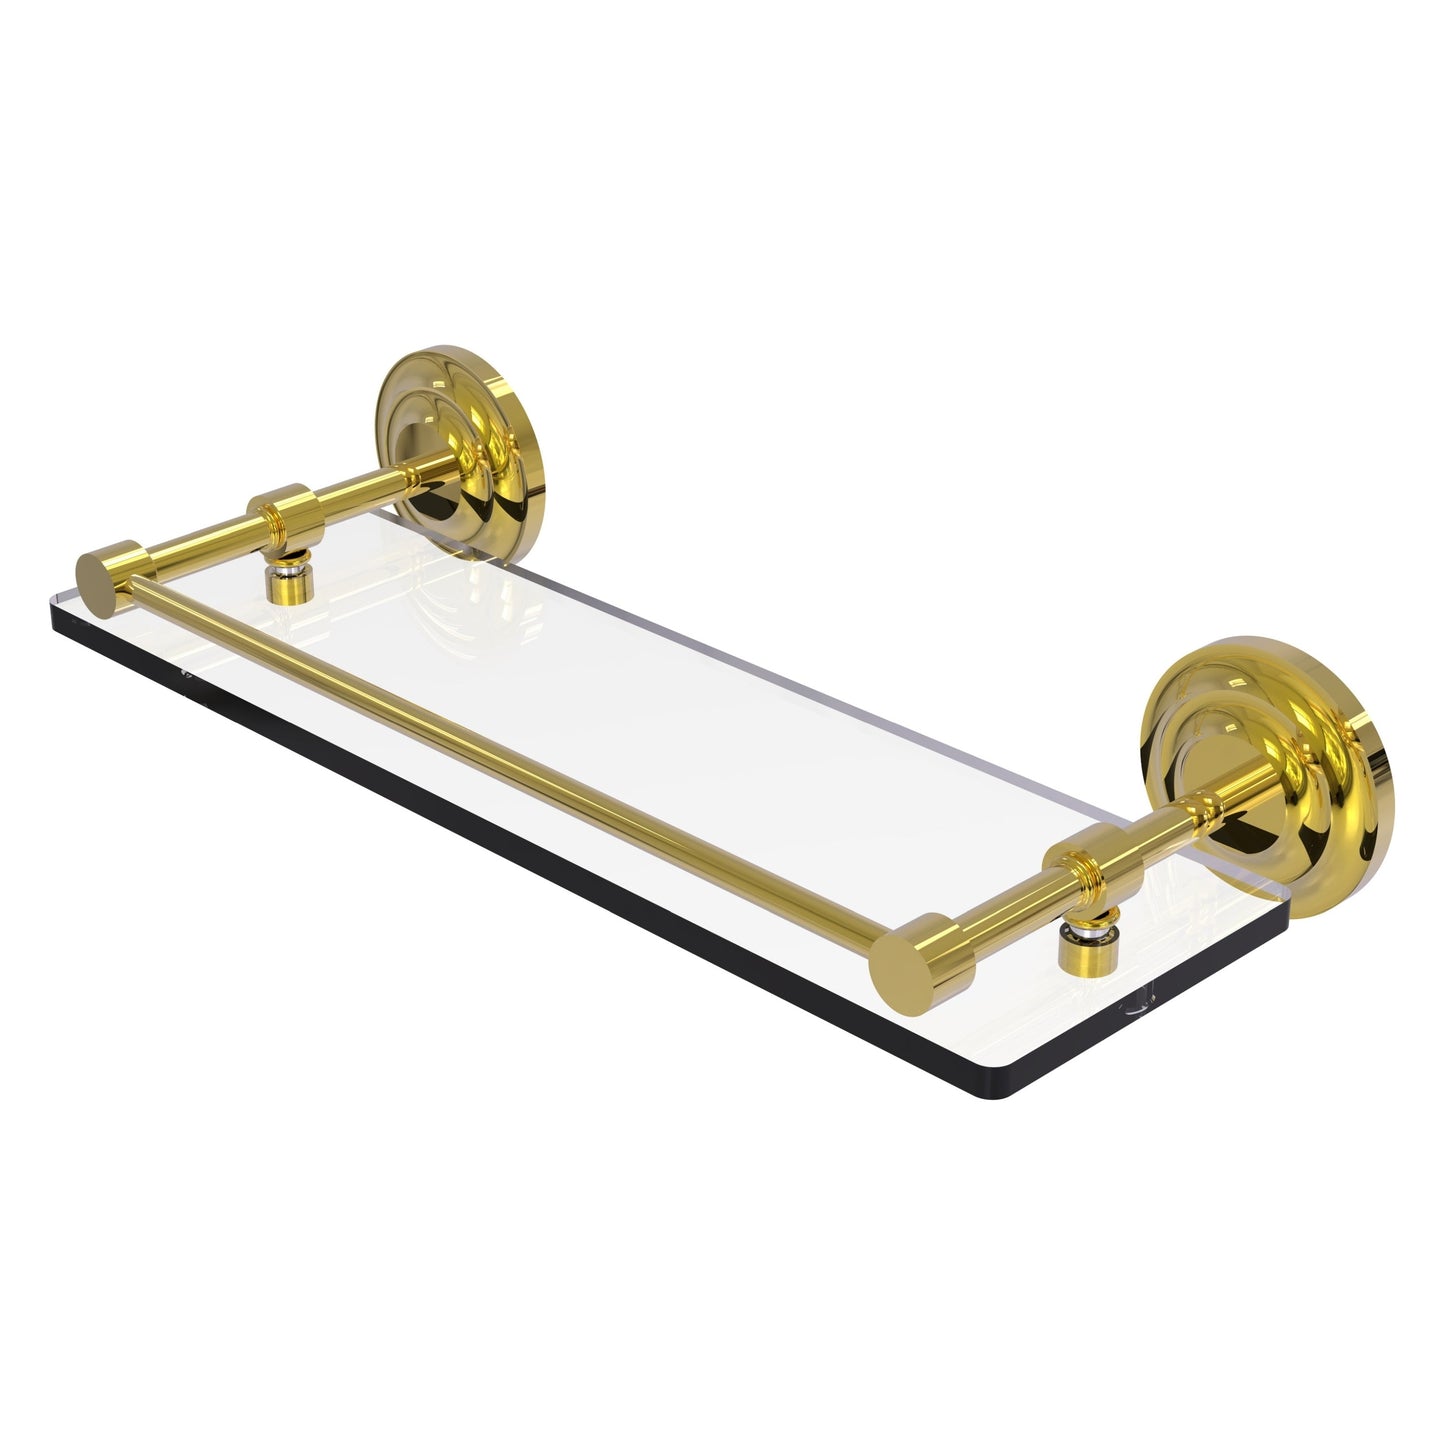 Allied Brass Que New 16" x 5" Polished Brass Solid Brass 16-Inch Tempered Glass Shelf With Gallery Rail